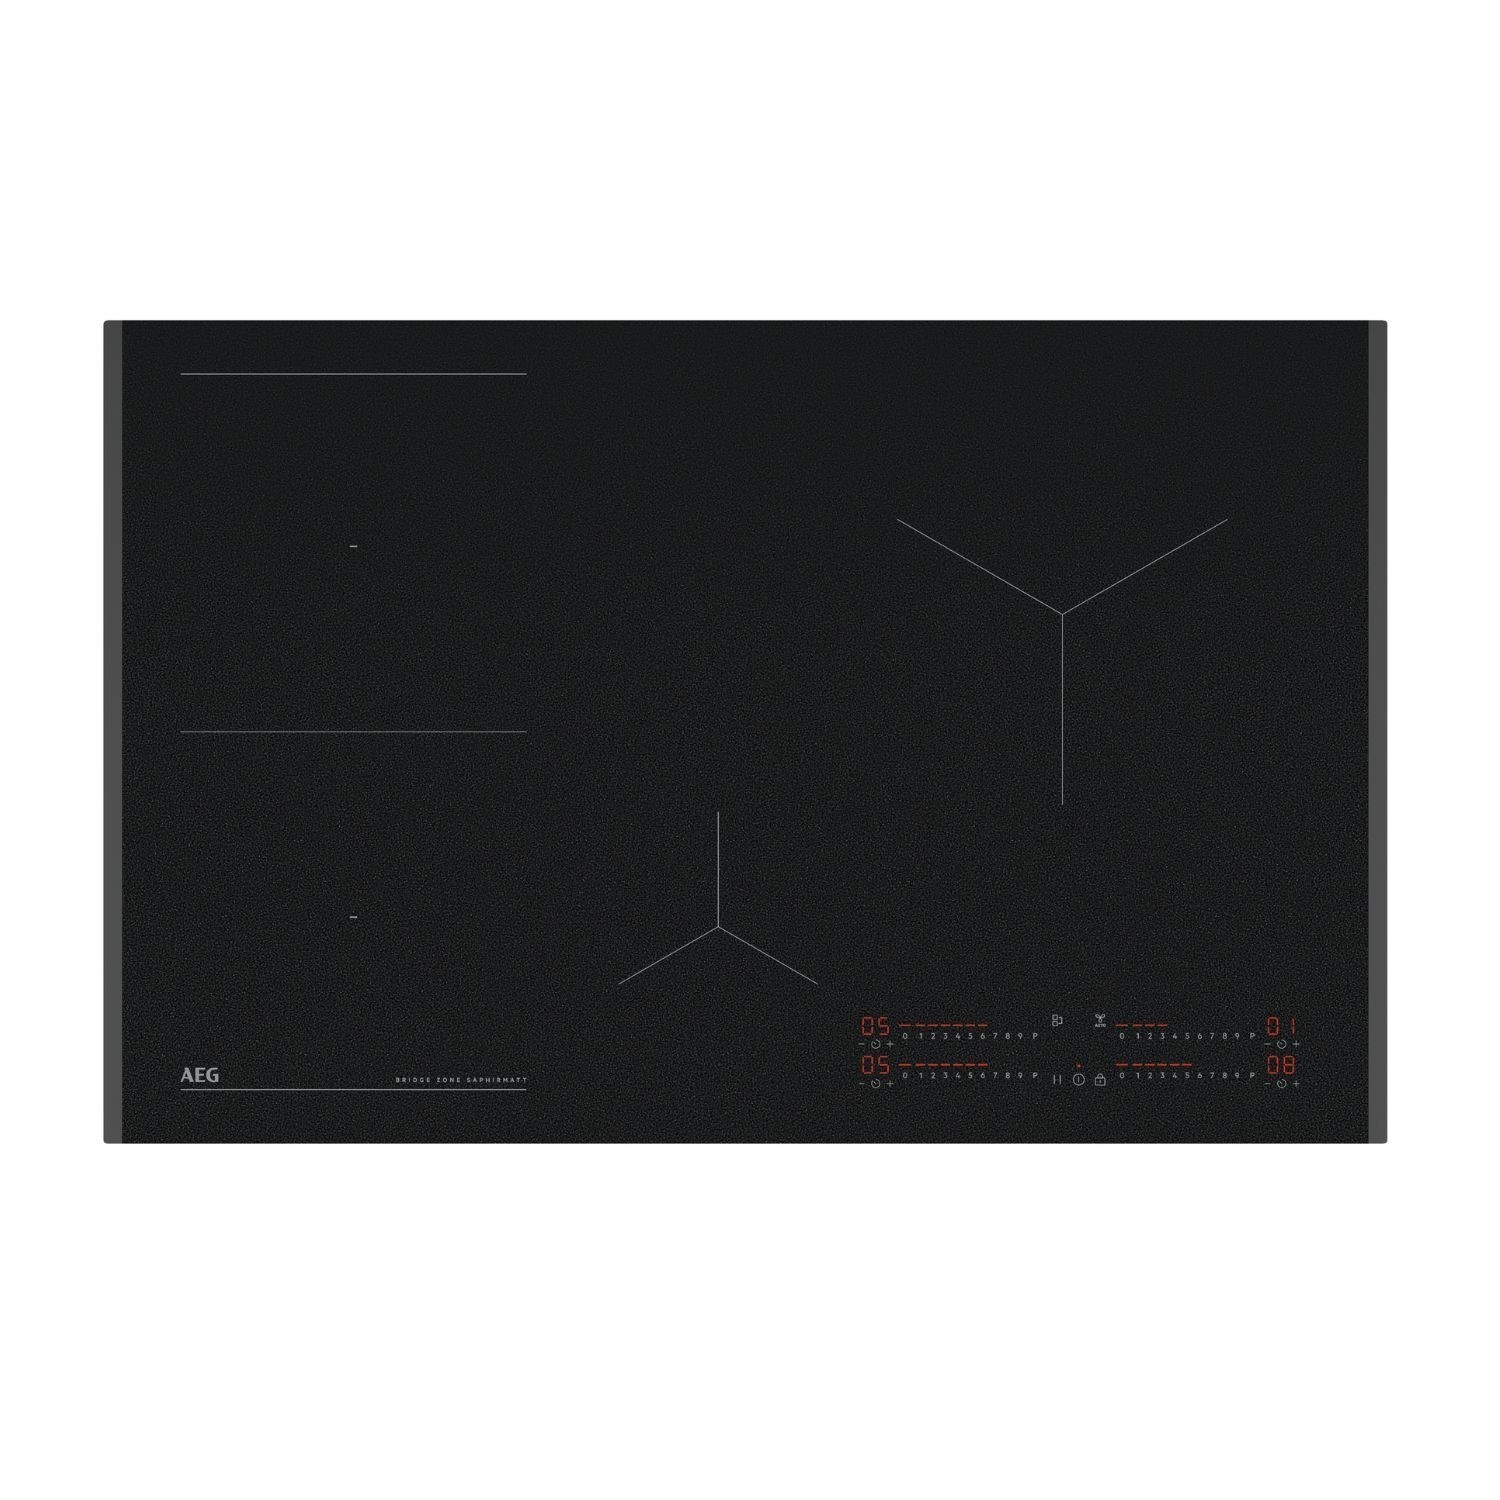 Photos - Other for Computer AEG 6000 Series 80cm 4 Zone Induction Hob with Bridge Zone 949598201 